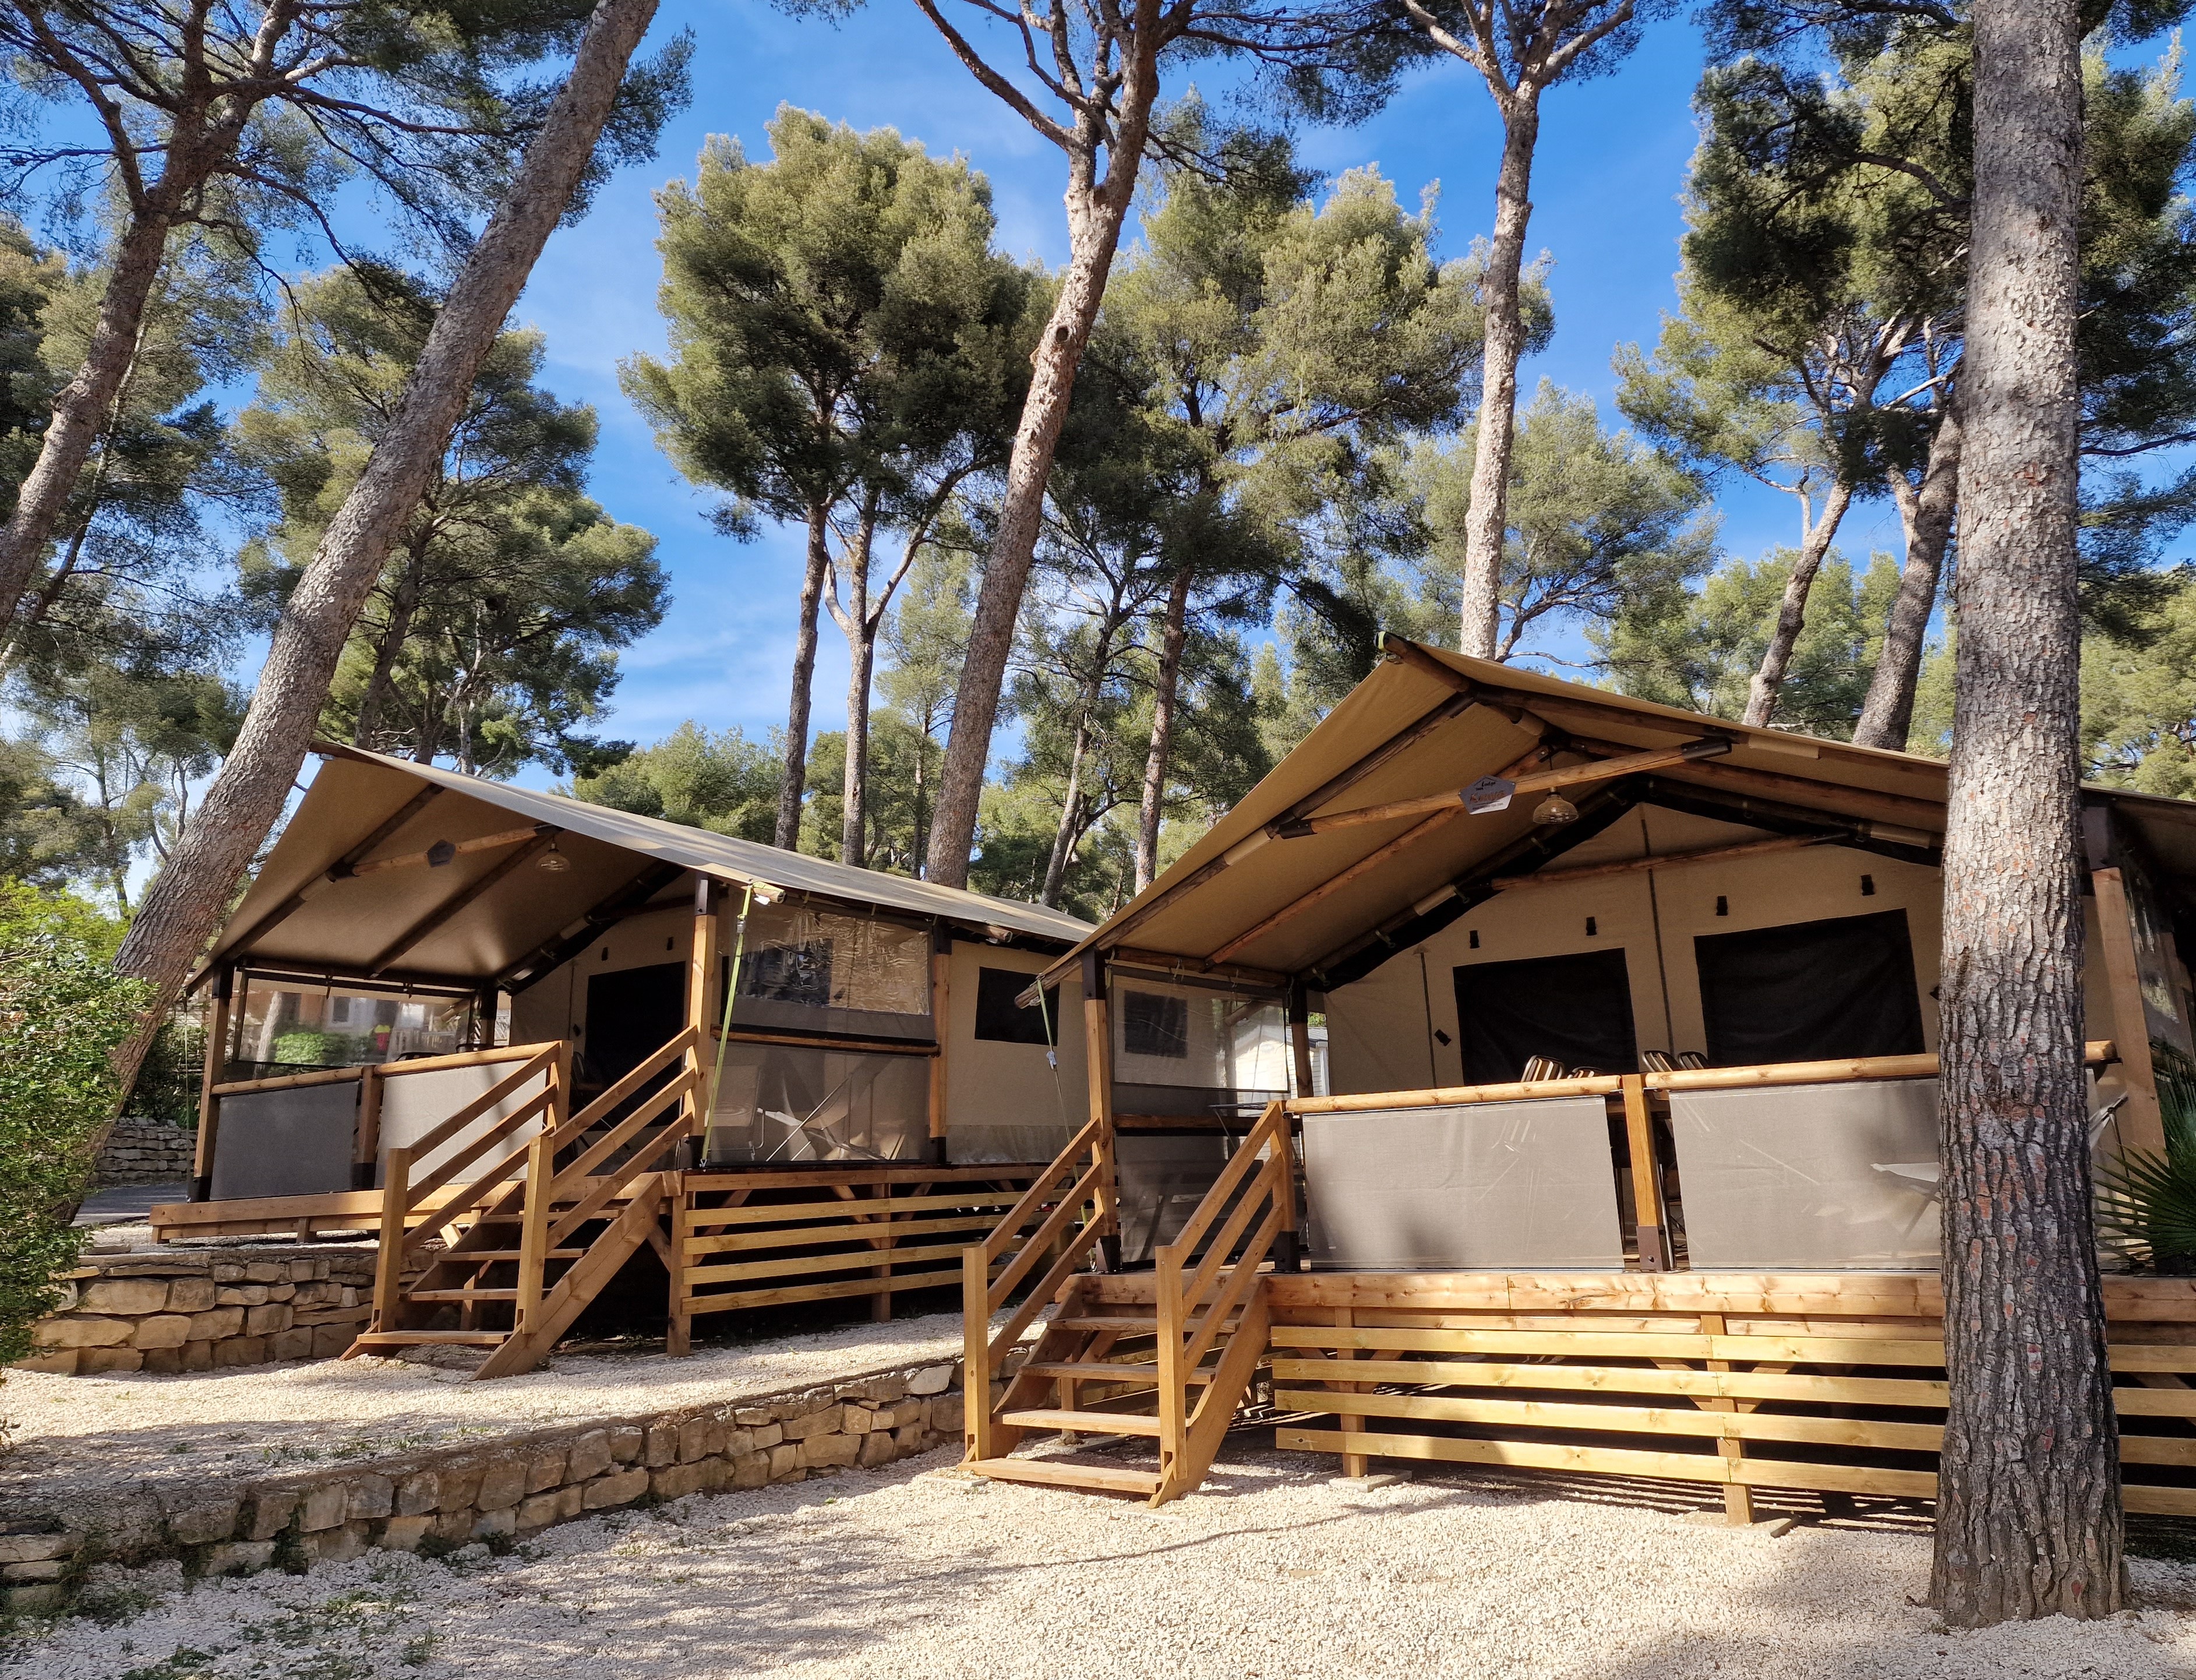 Accommodation - Tent Kenya 34.5M² / 5 Persons - Camping de Ceyreste